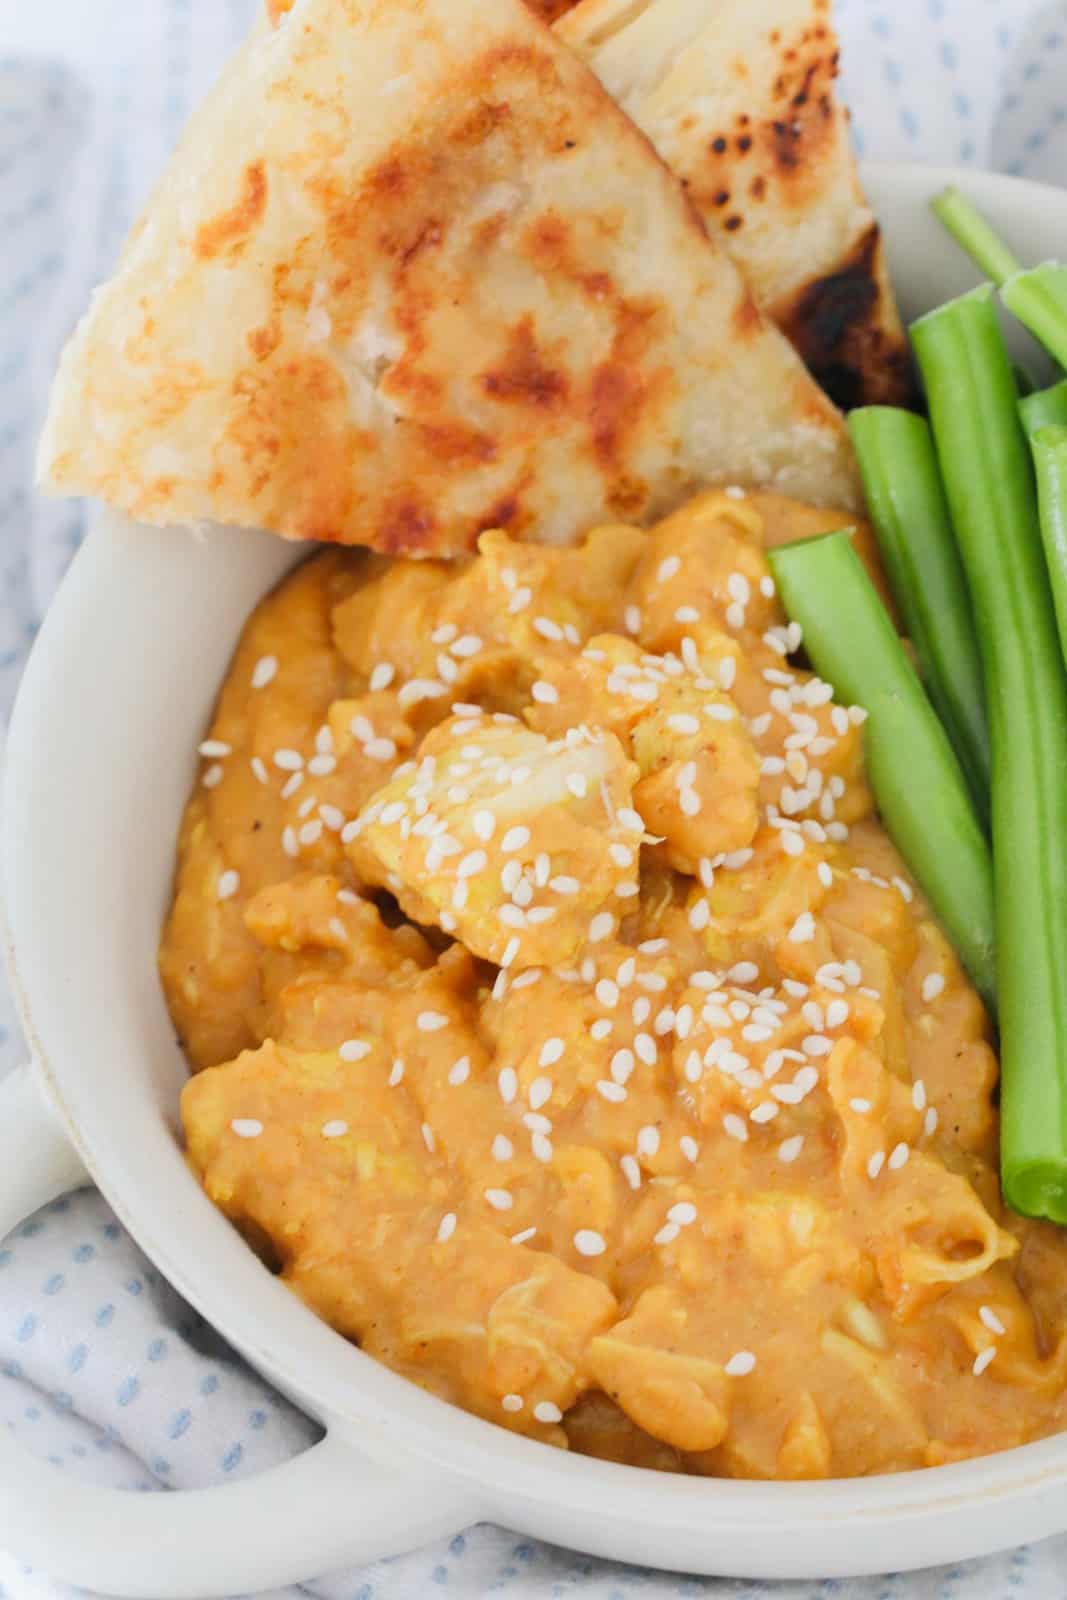 Creamy butter chicken in a bowl served with green vegetables and roti bread.